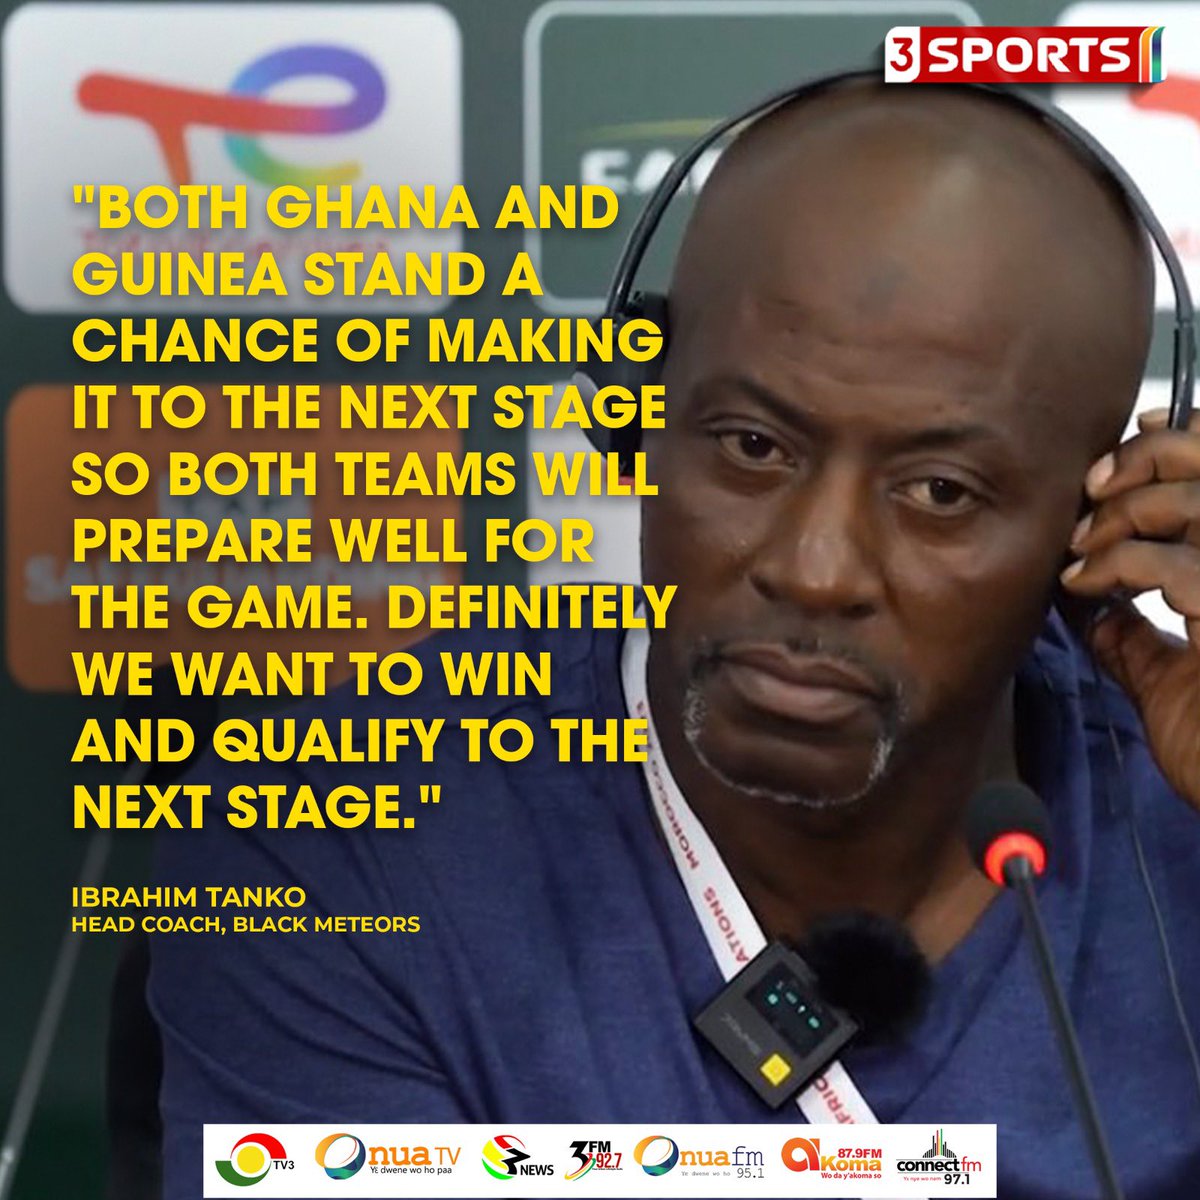 'Morocco had two days rest and we had a day to rest'

Ibrahim Tanko after Ghana lost 5-1 to Morocco in the #TotalEnergiesAFCONU23 

#3Sports [via @3SportsGh]